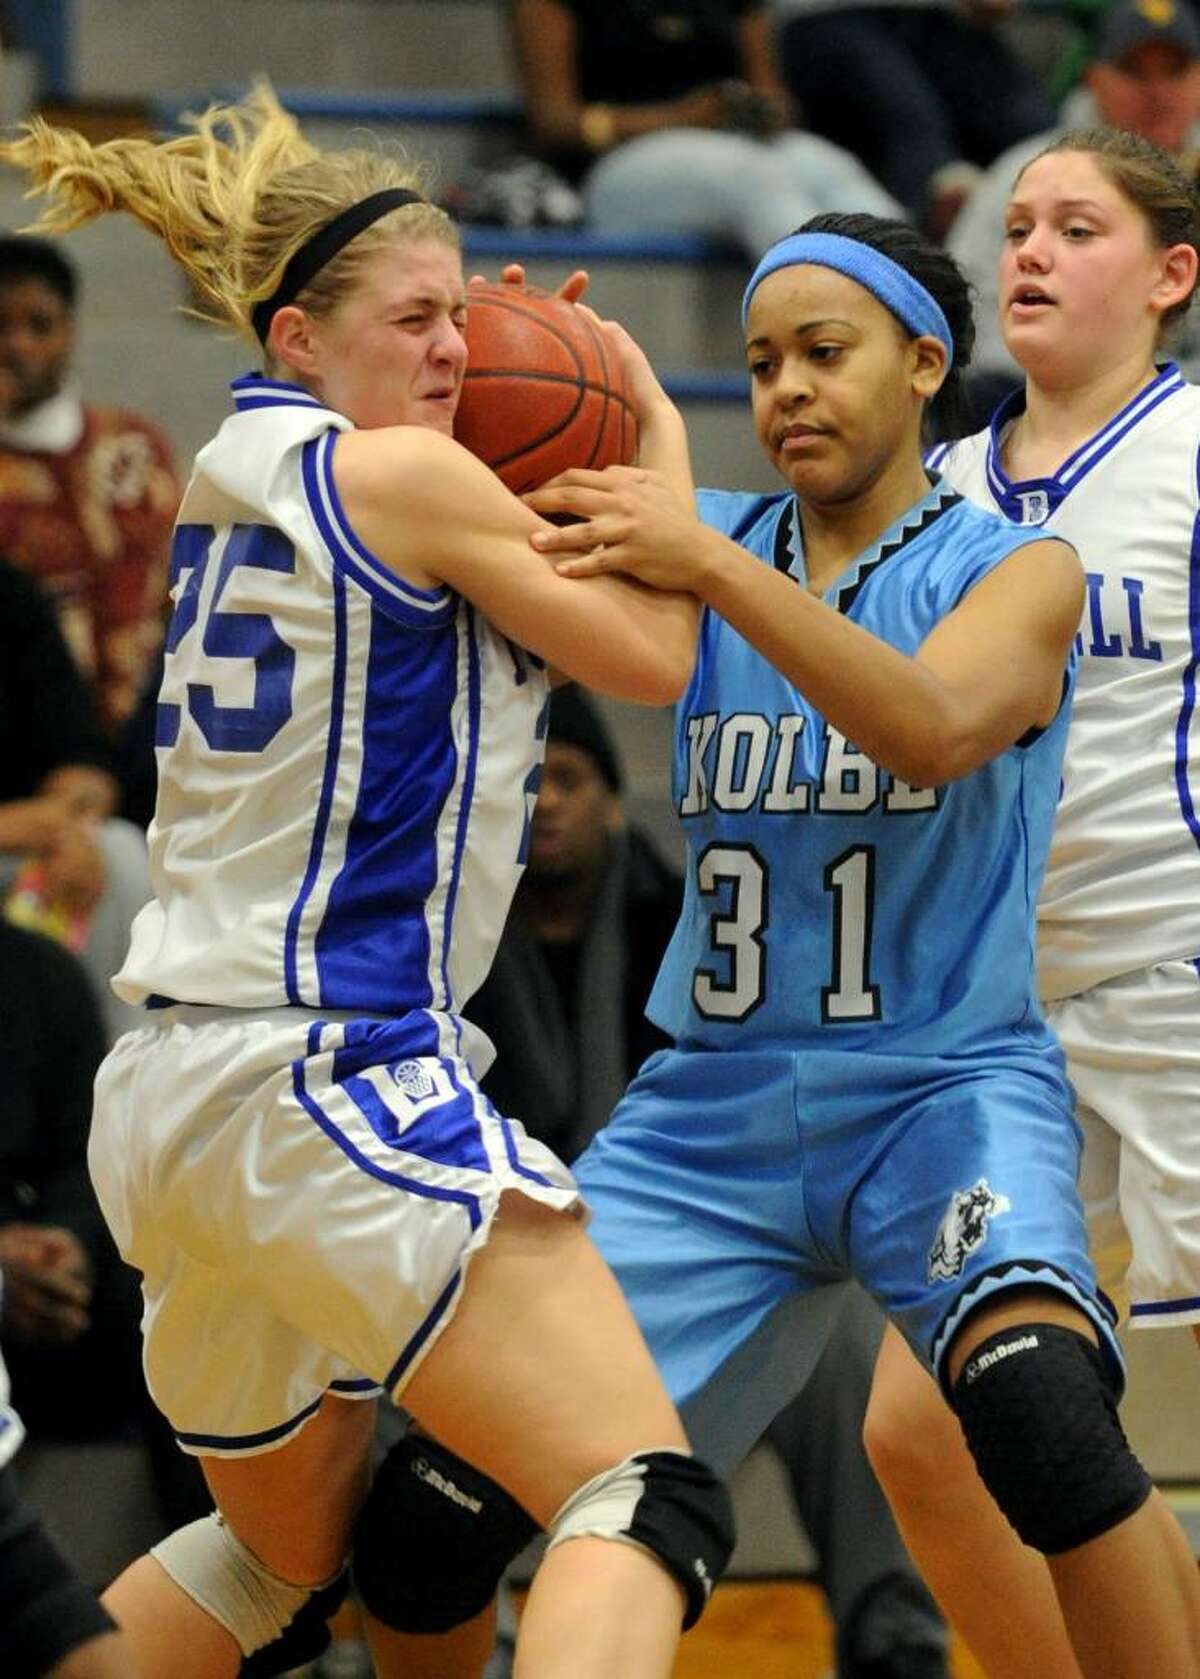 Bunnell's #25 Erynn Miller, left, struggles for control of a loose ball with Kolbe's #31 Cherelle Moore, during girls basketball action in Stratford, Conn. on Tuesday Jan. 12, 2010.